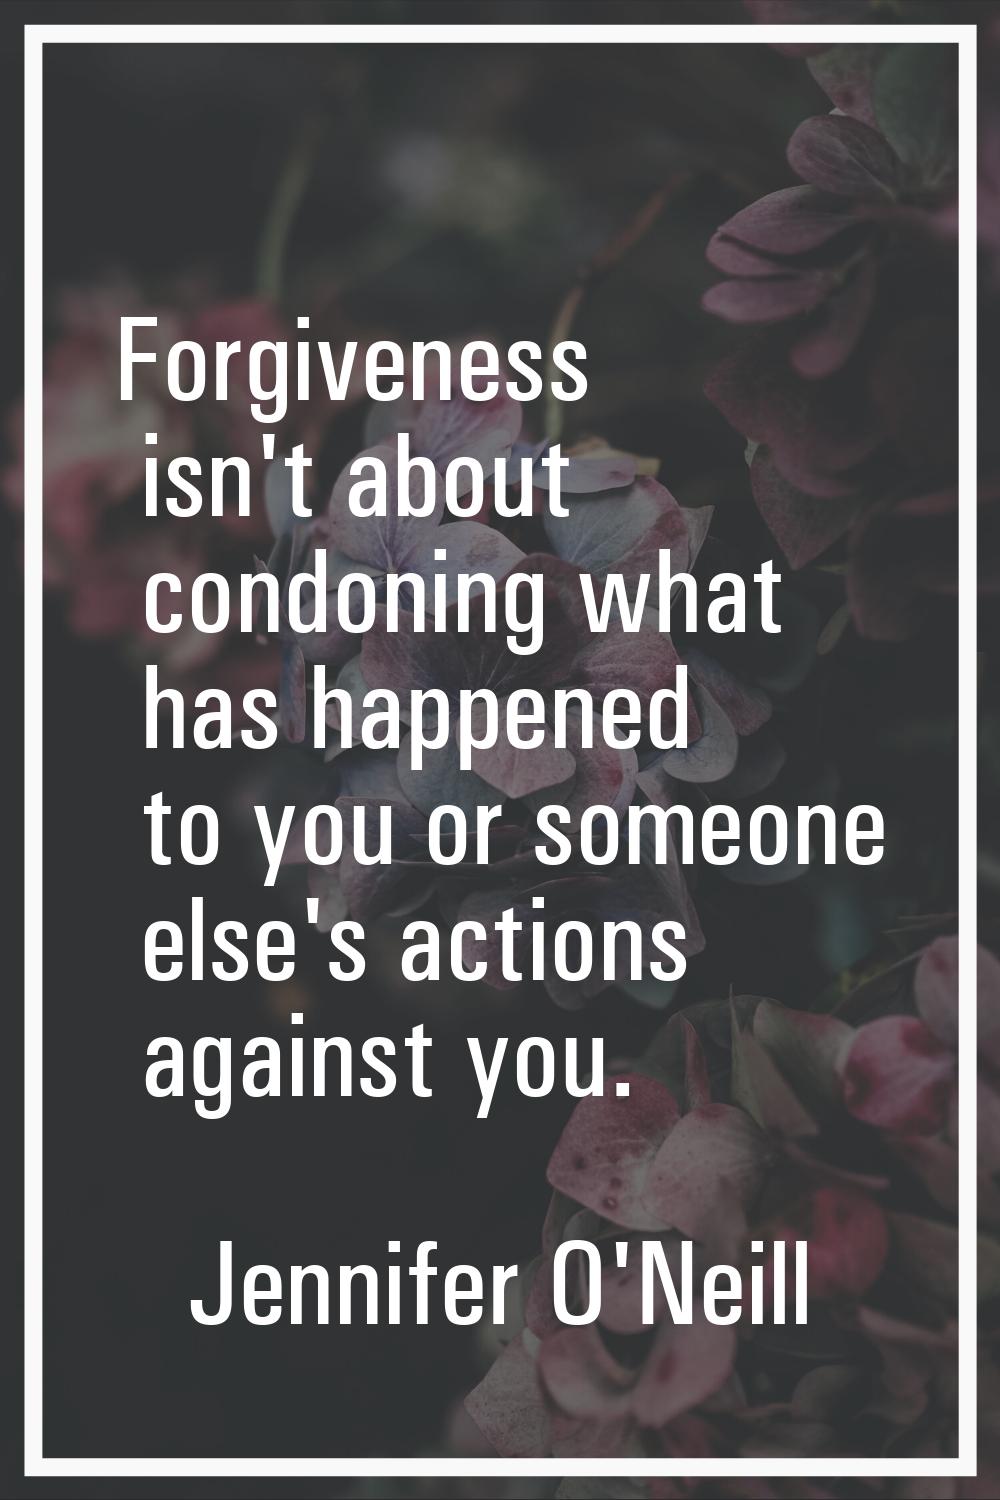 Forgiveness isn't about condoning what has happened to you or someone else's actions against you.